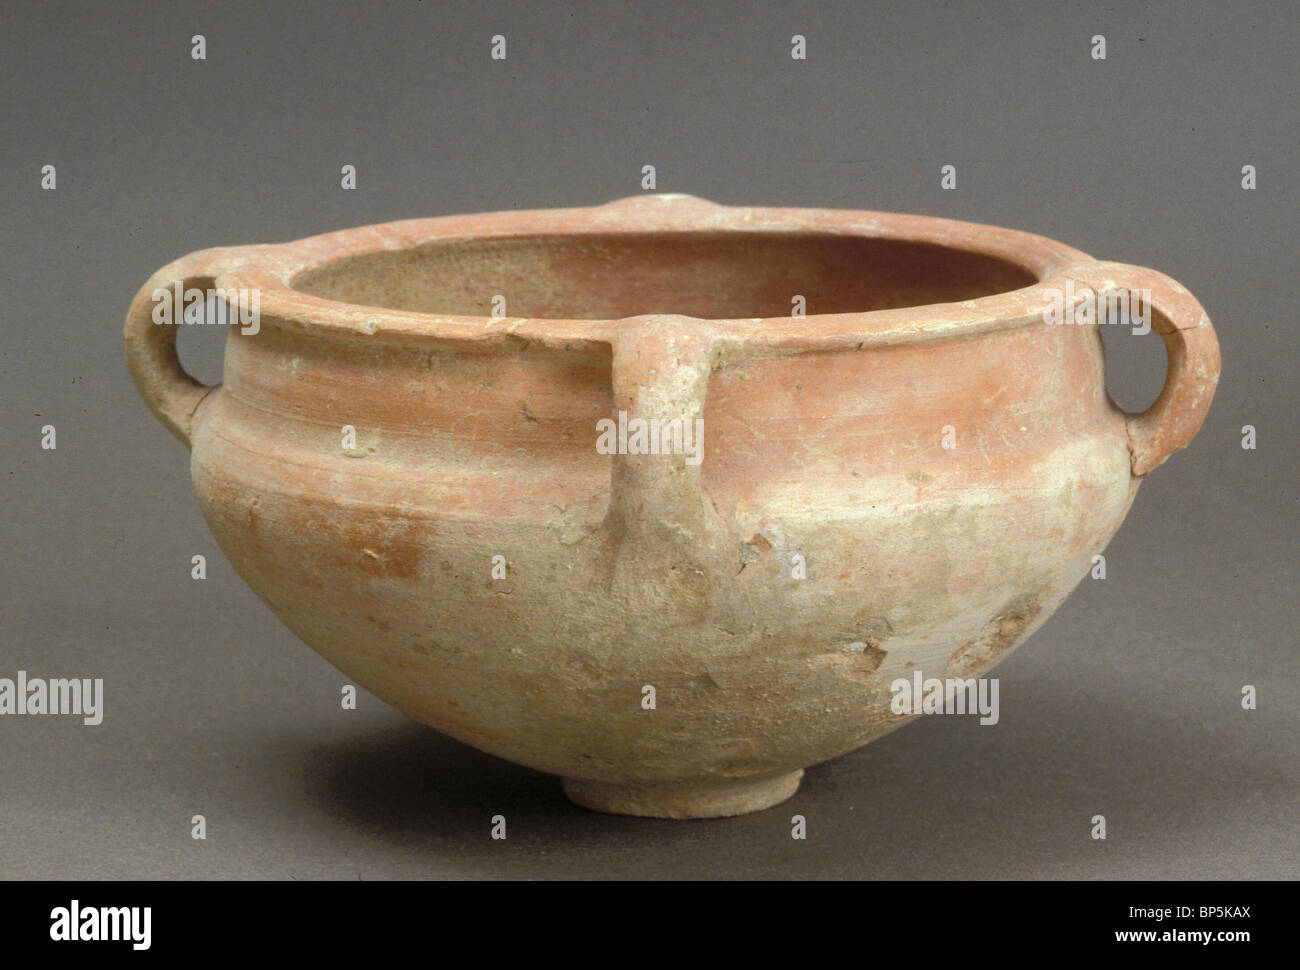 5032. LARGE BASIN, PROBABLY USED FOR STORAGE OR WASHING, DAN EXCAVATIONS, C. 9-8 C. BC Stock Photo